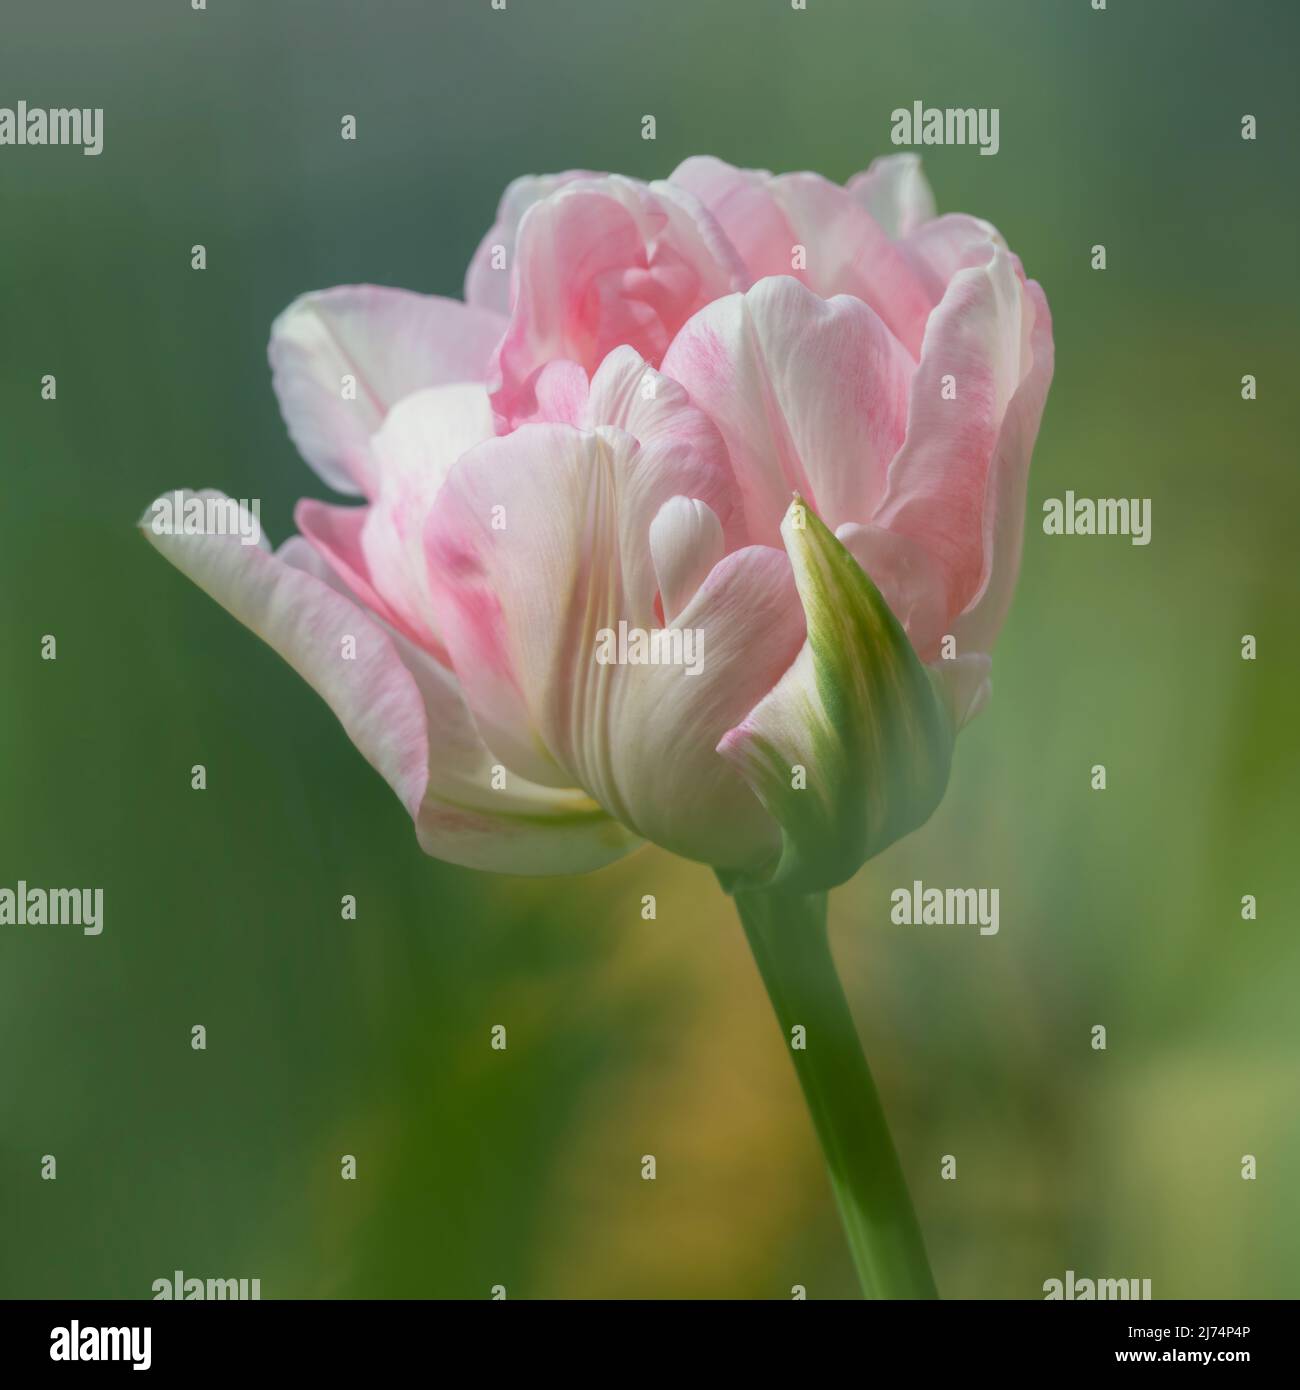 Gorgeous pink and white Parrot Tulip just coming into flower and set against out of focus foliage in a garden Stock Photo